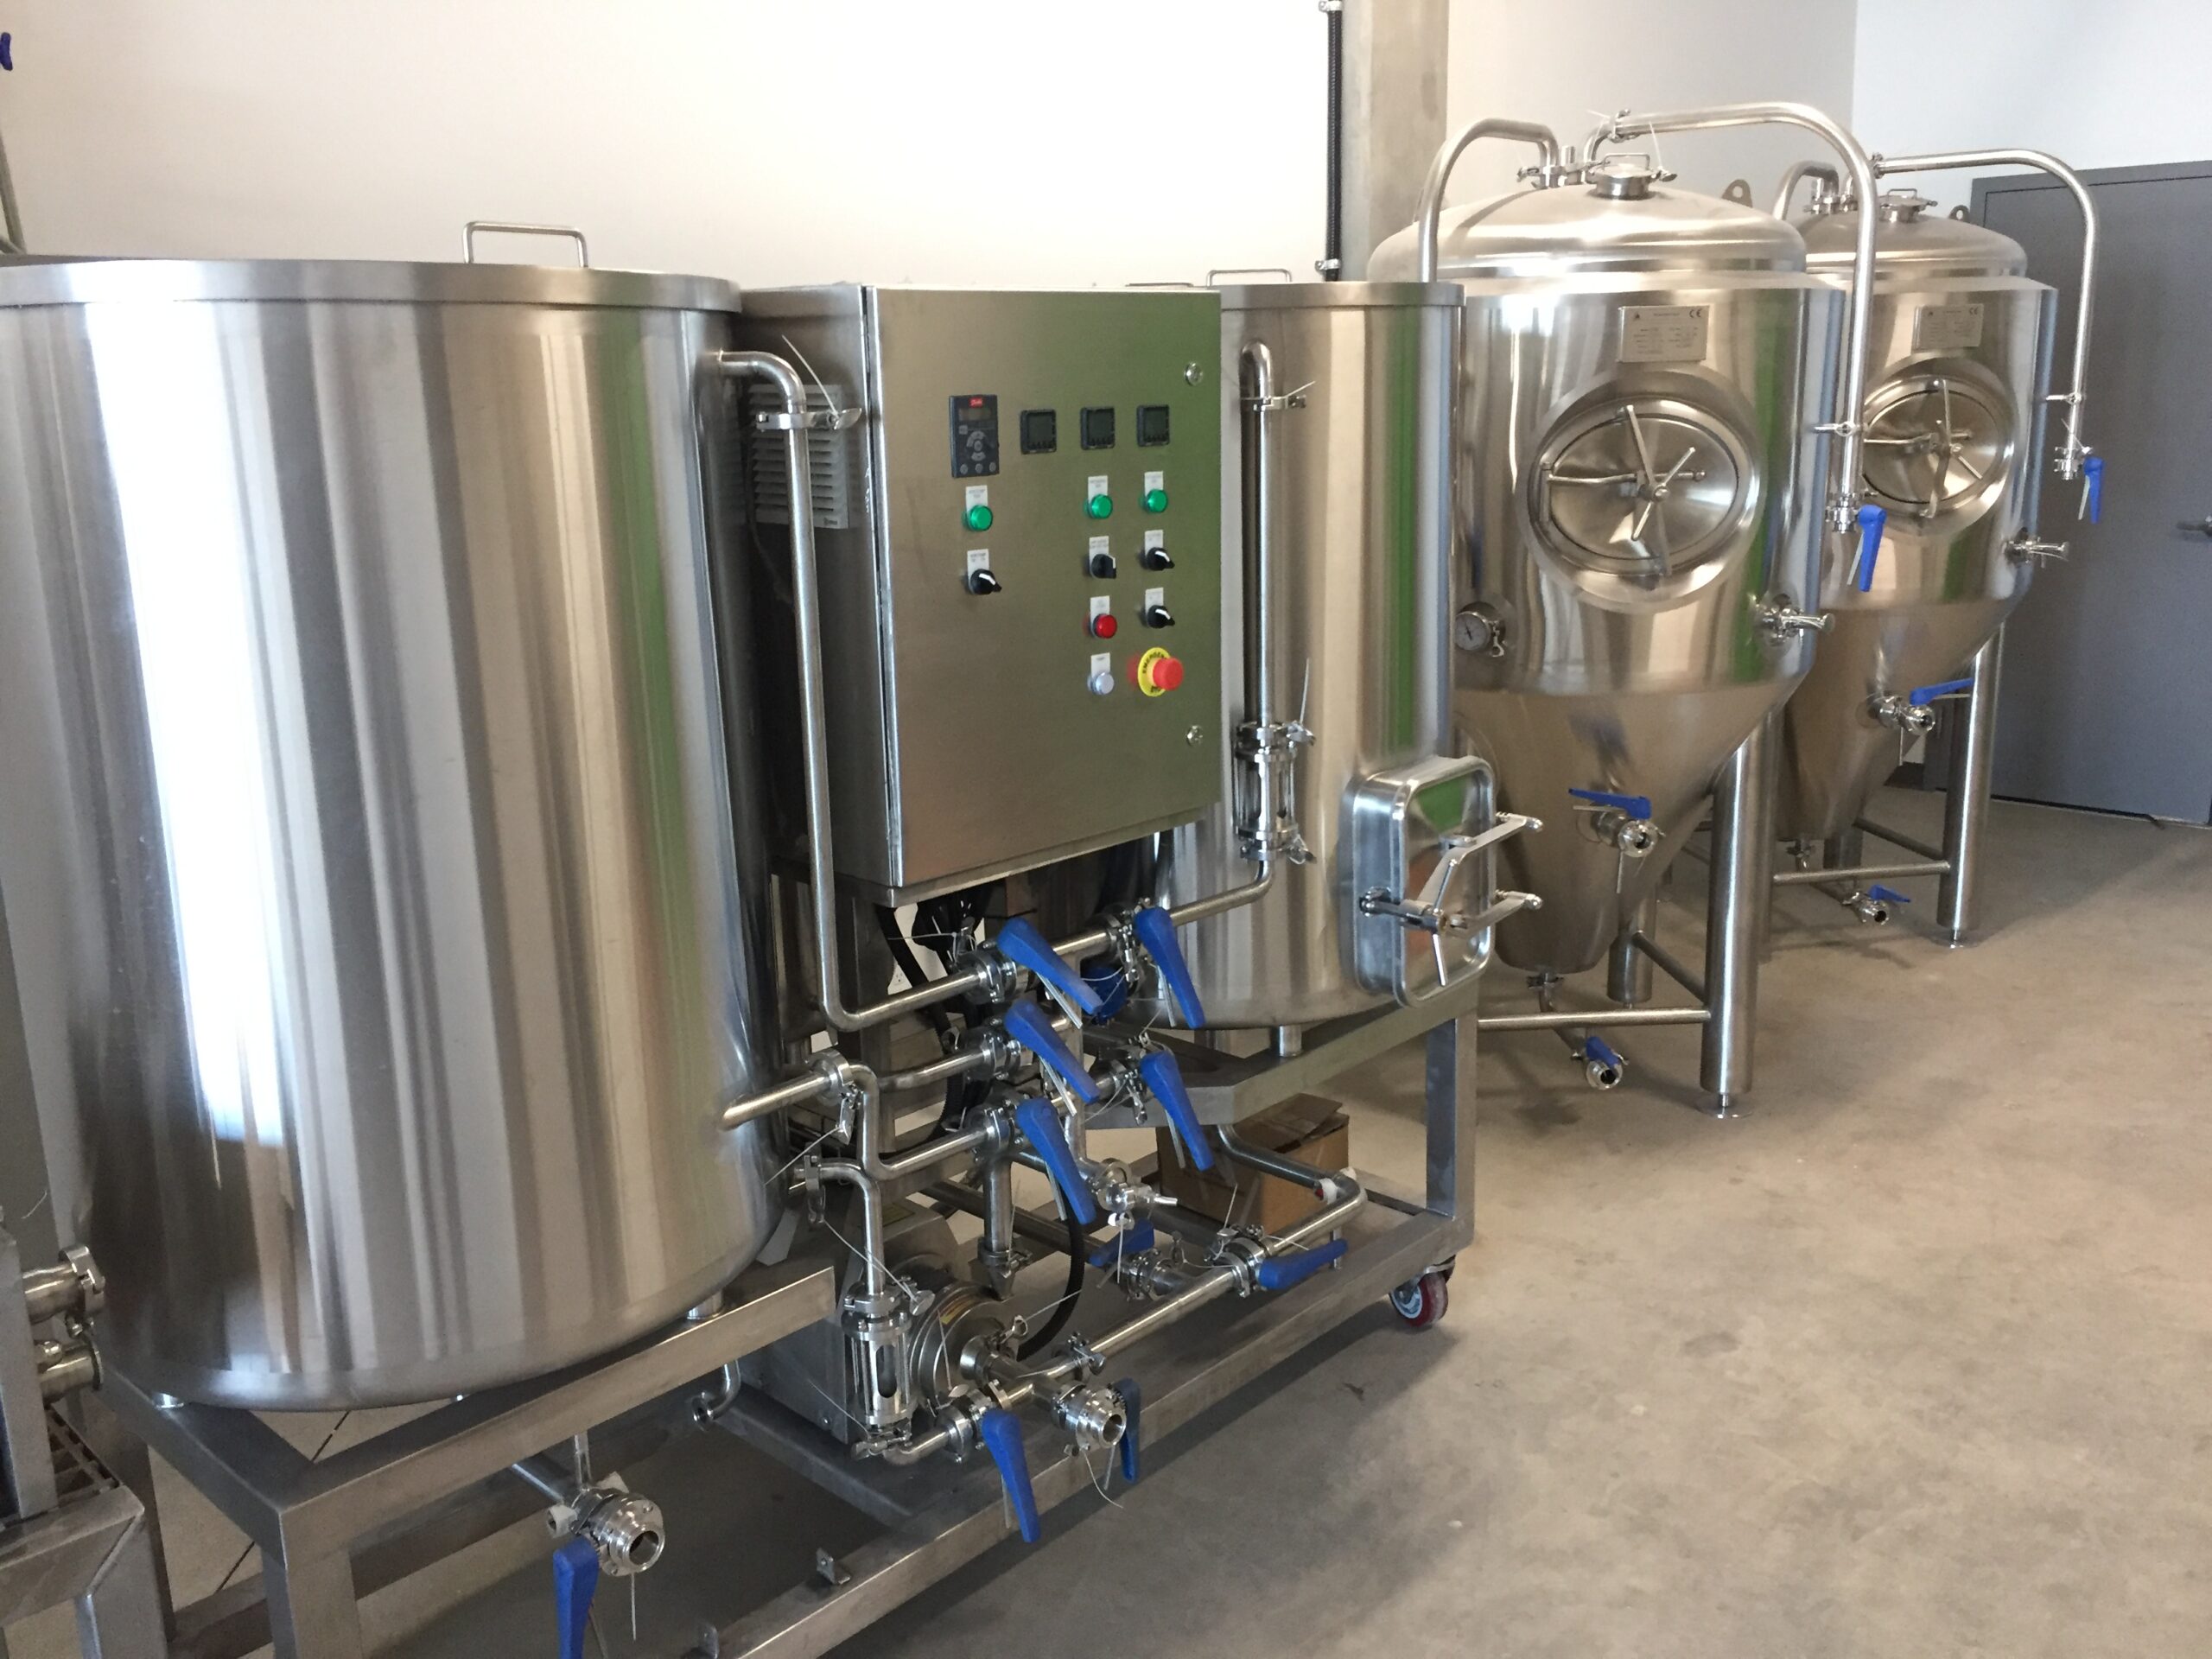 Selecting The Correct Valves For Your Craft Beer Brewhouse System – Butterfly Valves Vs. Pneumatic Valves